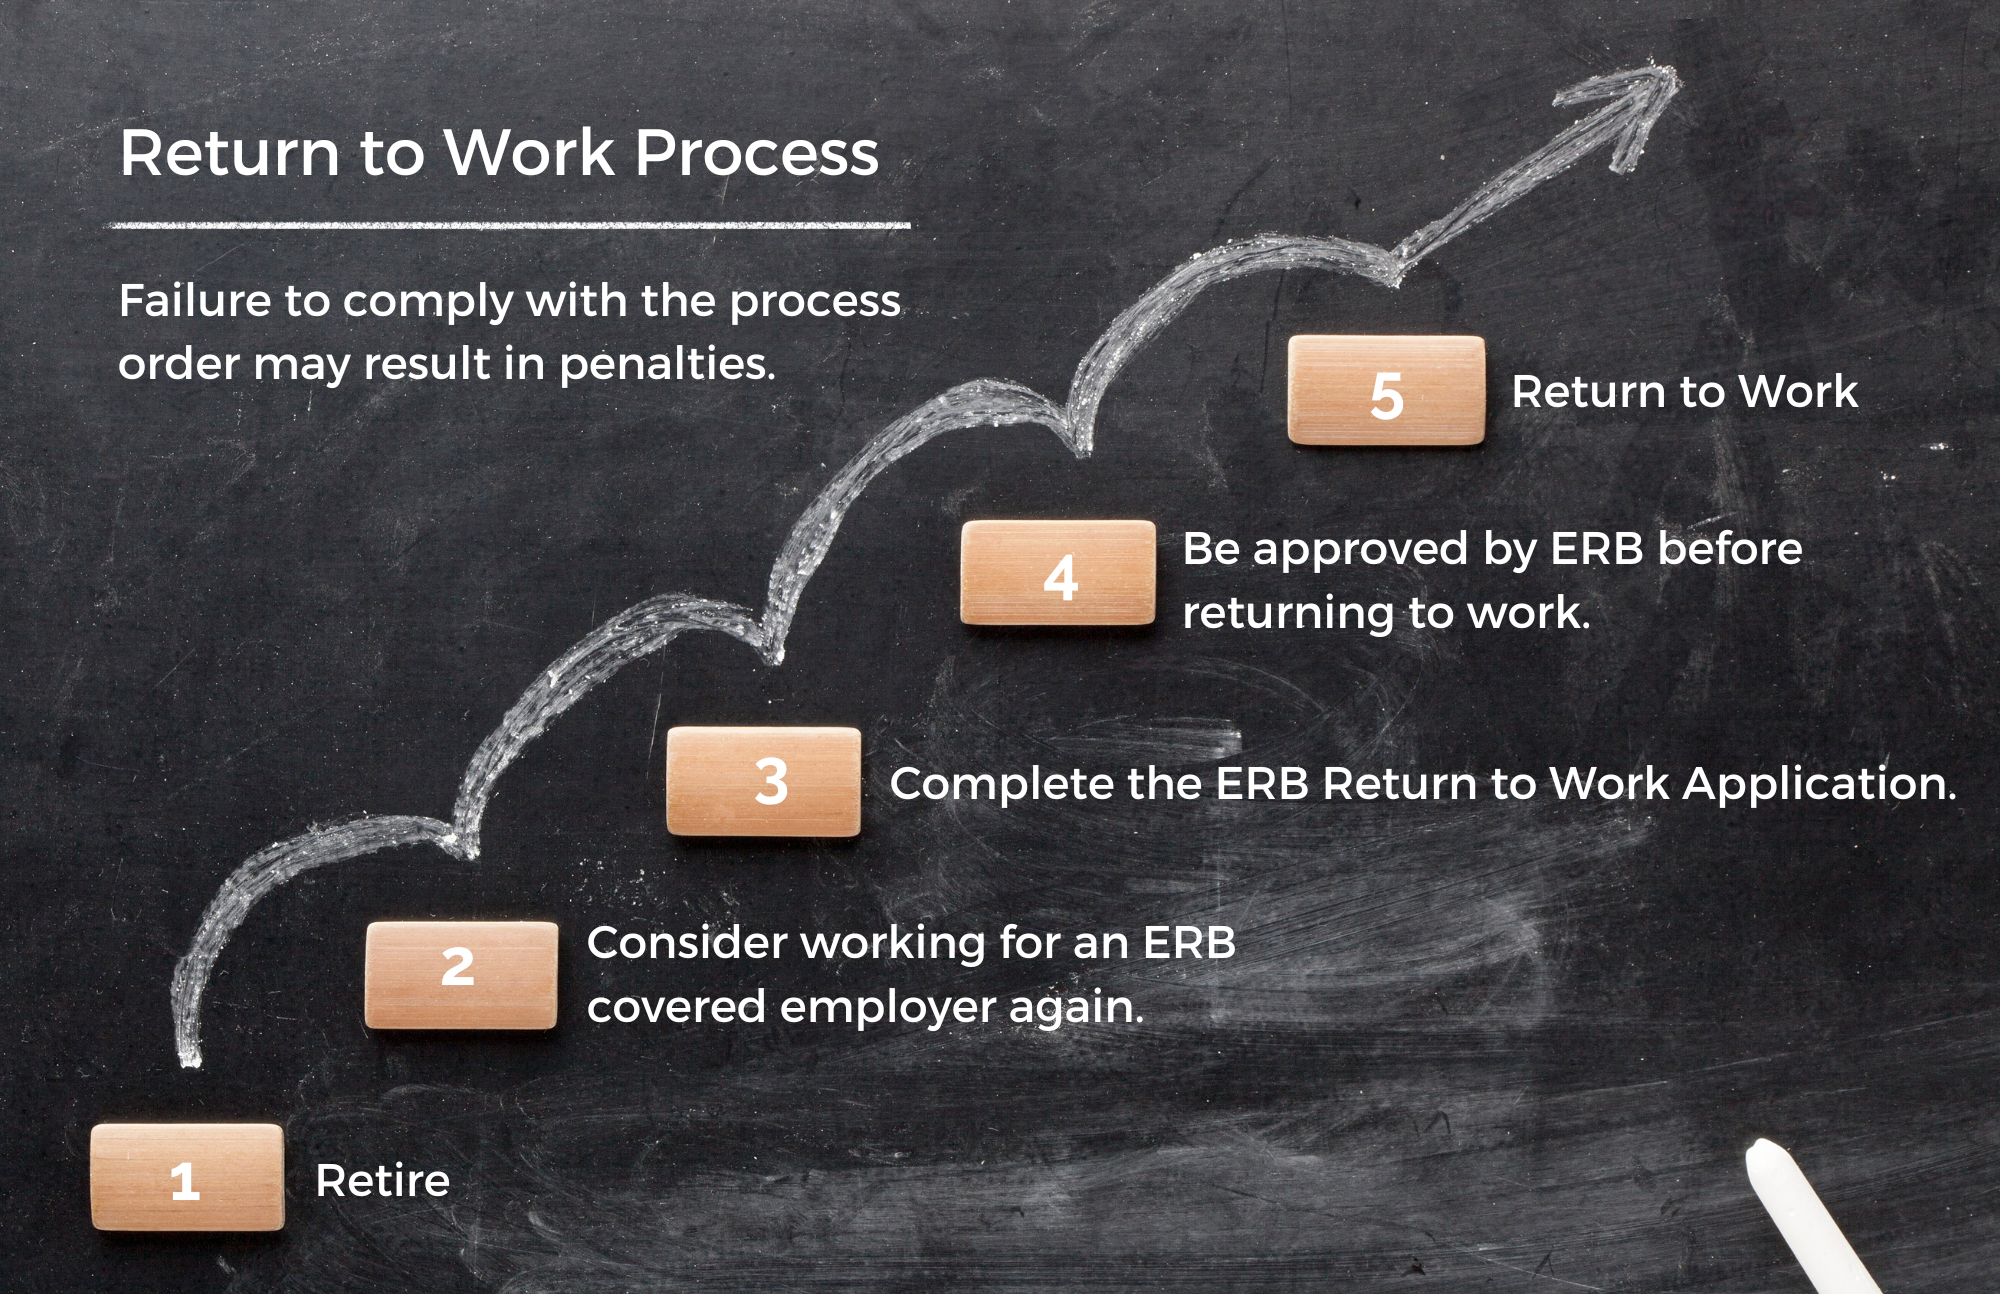 Return to Work Process - Failure to comply with the process order may result in penalties. 1 - Retire; 2 - Consider working for an ERB covered employer again; 3 - Complete the ERB Return to Work Application; 4 - Be Approved by ERB before returning to work; and 5 - Return to Work.